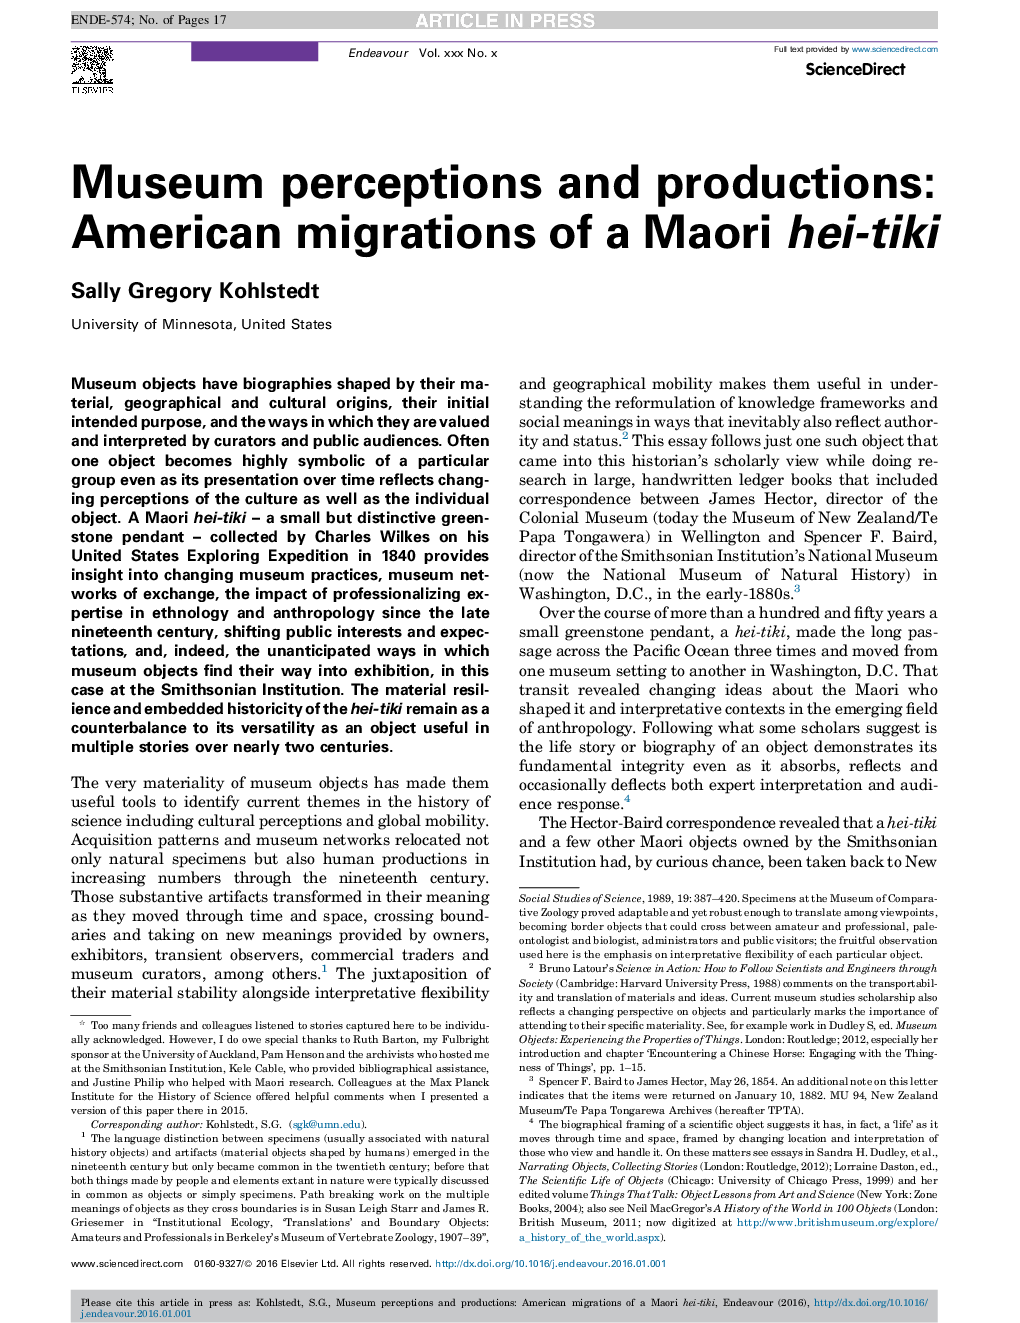 Museum perceptions and productions: American migrations of a Maori hei-tiki